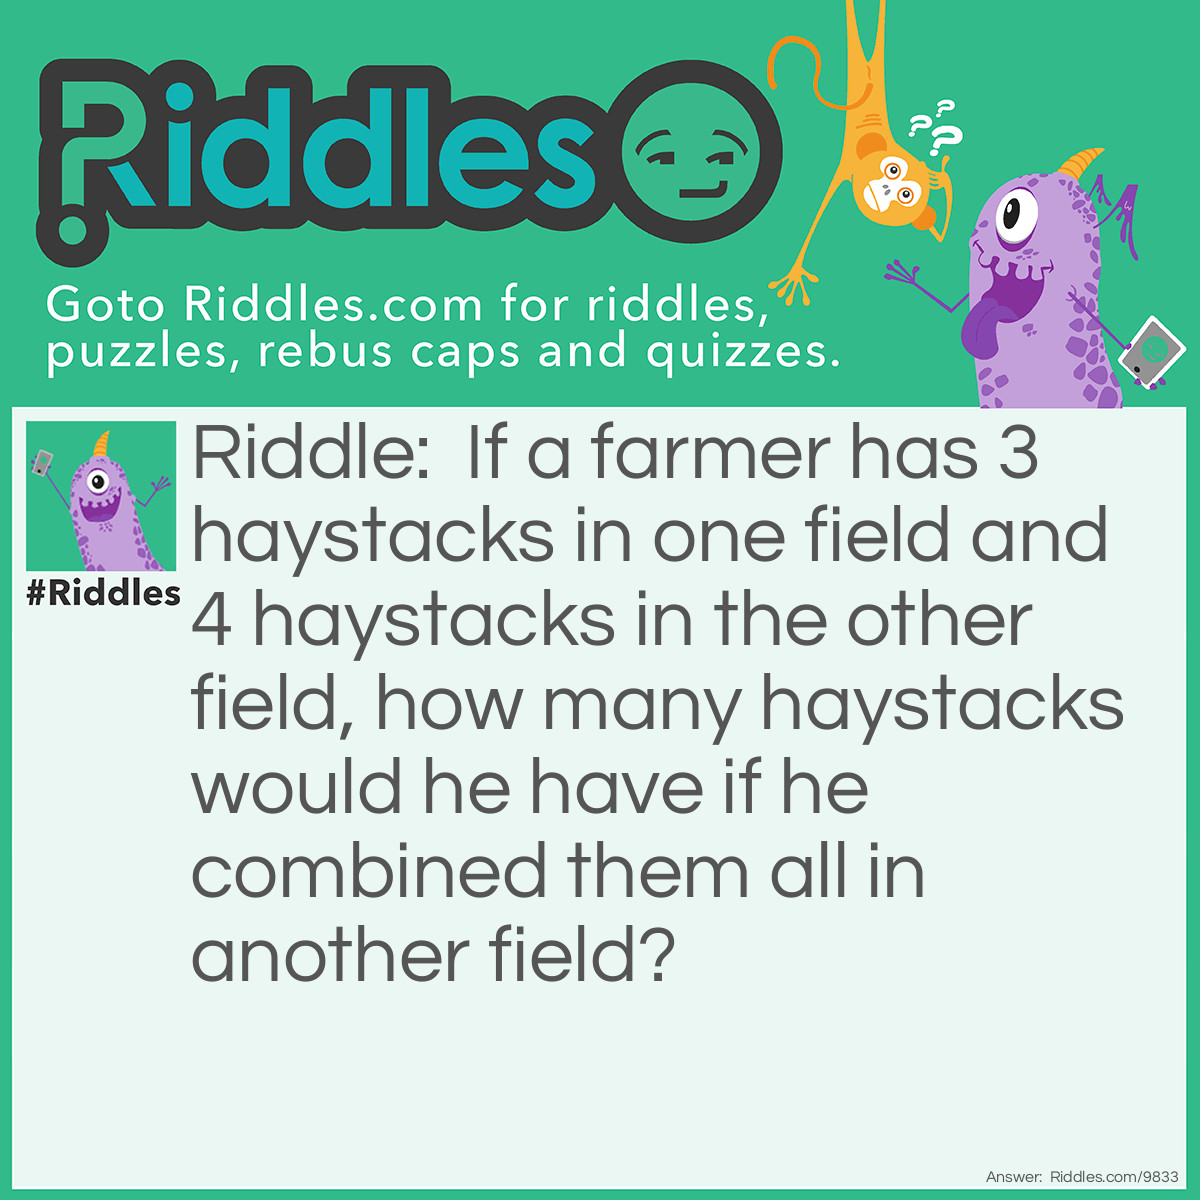 Riddle: If a farmer has 3 haystacks in one field and 4 haystacks in the other field, how many haystacks would he have if he combined them all in another field? Answer: He would have one haystack. If you combine them all into one, there'd only be one.